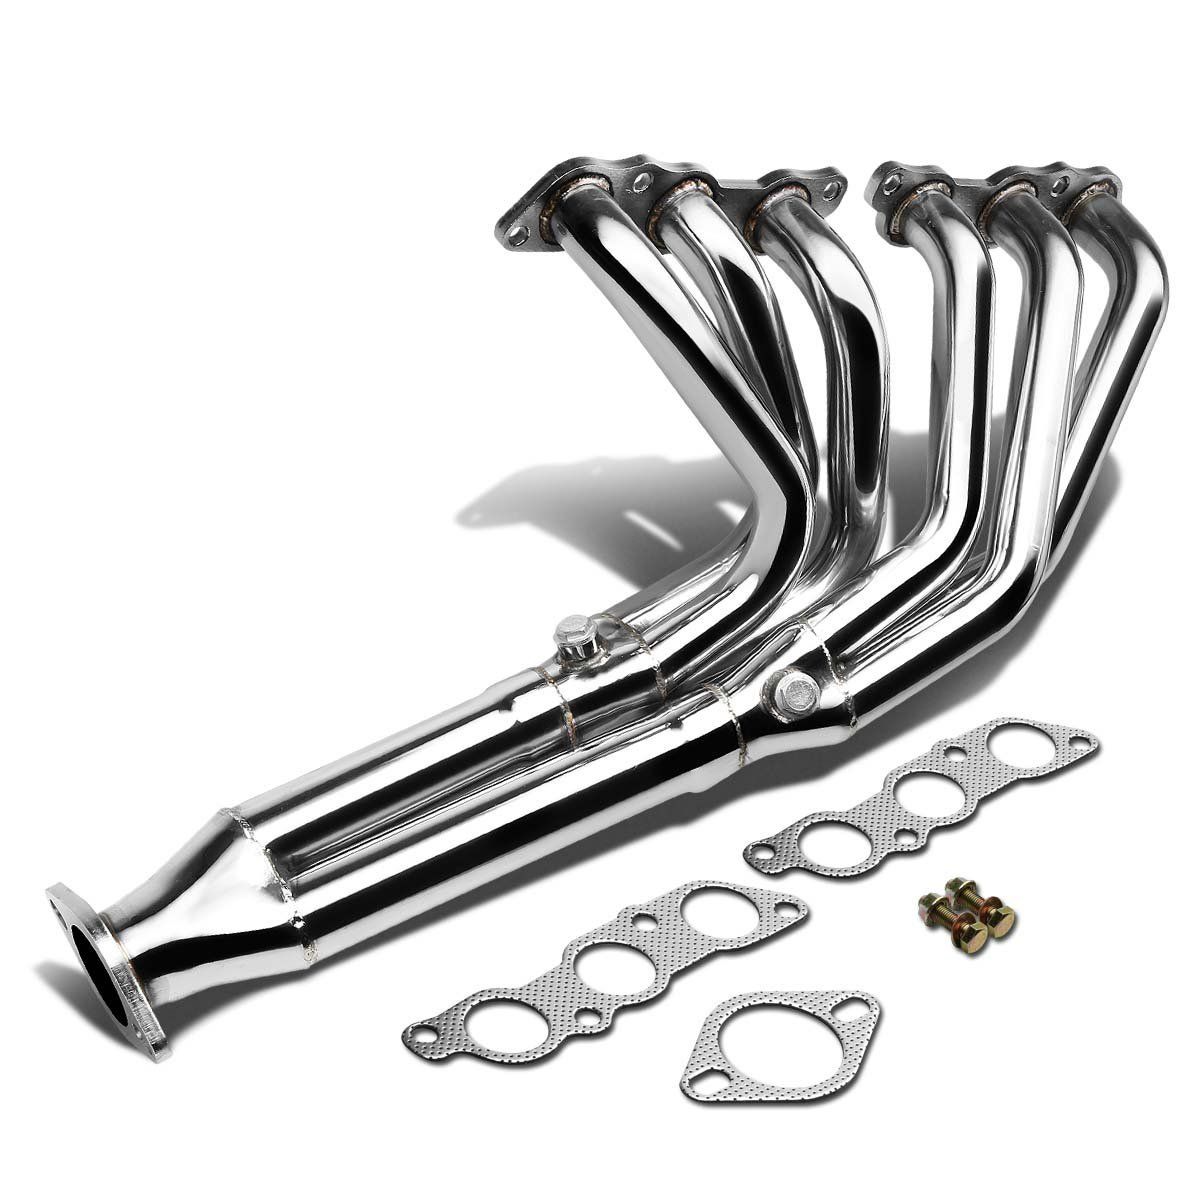 ODM Weld Bung Fitting Factories –  Stainless Racing Header Manifold Exhaust header Fits For 93-98 Toyota Supra MK4 NA 3.0L – Yibai